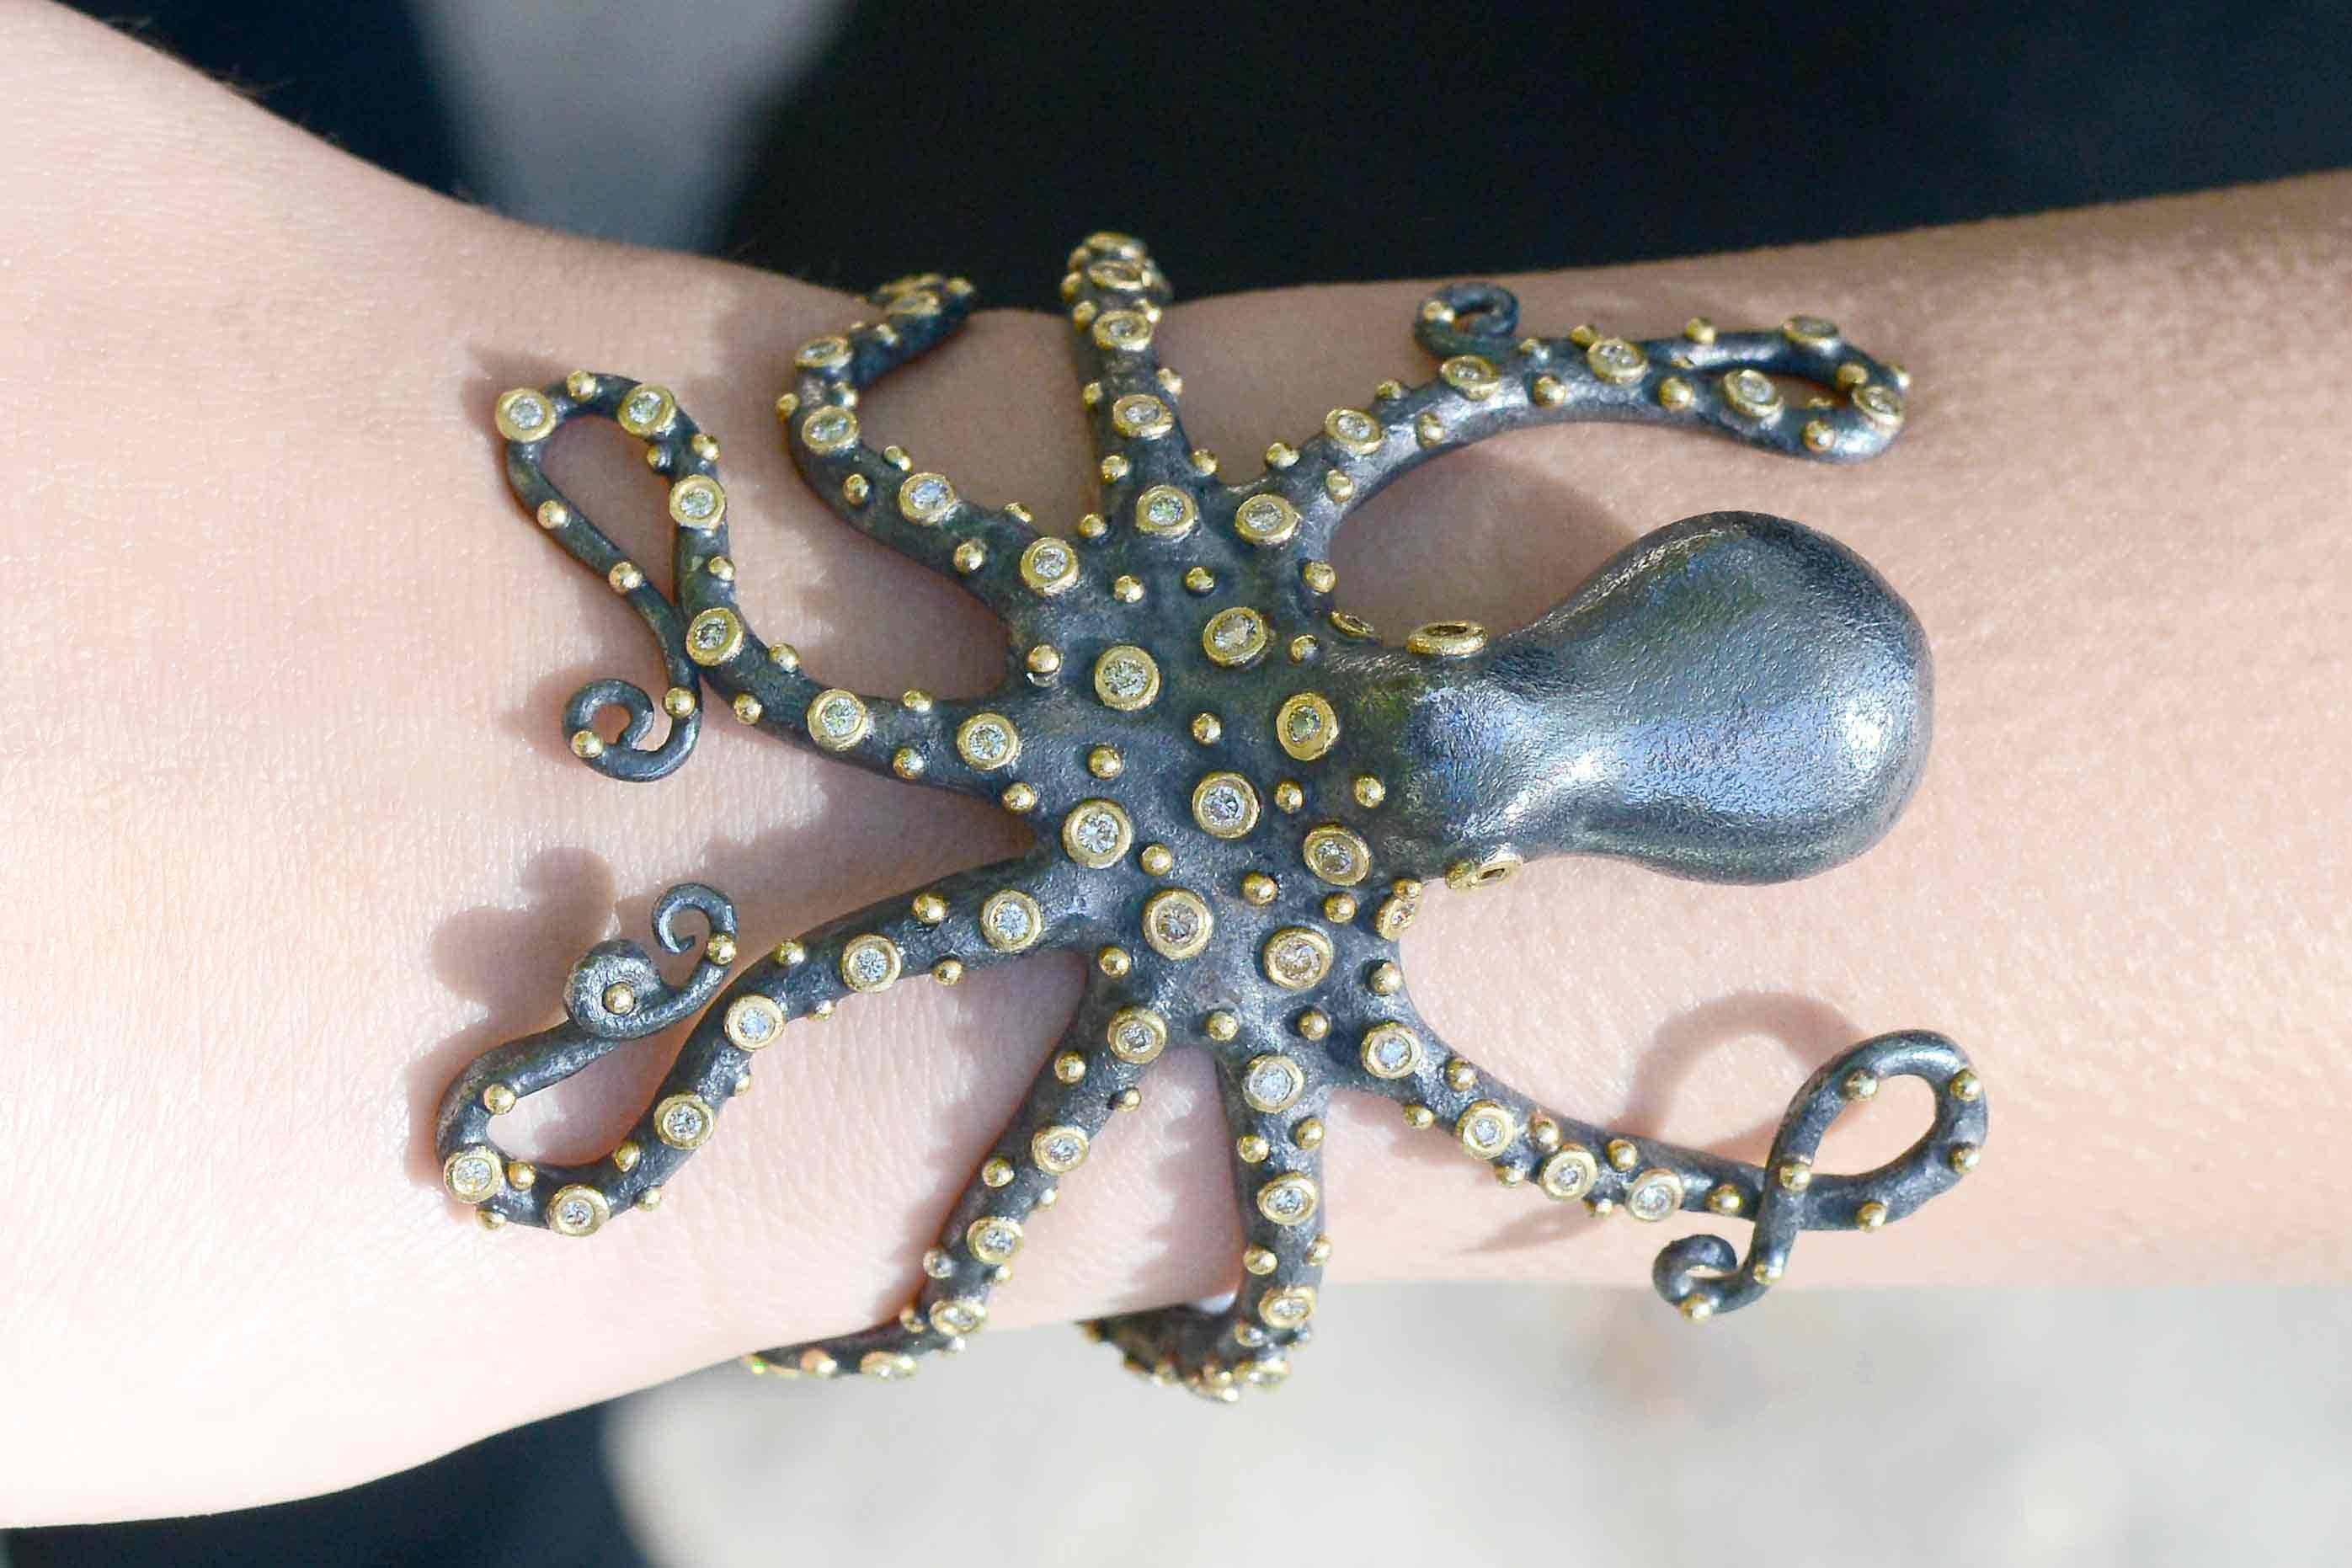 An outstanding octopus cuff bracelet is artfully rendered in rich 24 karat gold and oxidized silver 2 tone. Wrapping seductively around the wrist, this sea-life creature features diamond studded tentacles and eyes totaling 1 3/4 carats. Made to fit